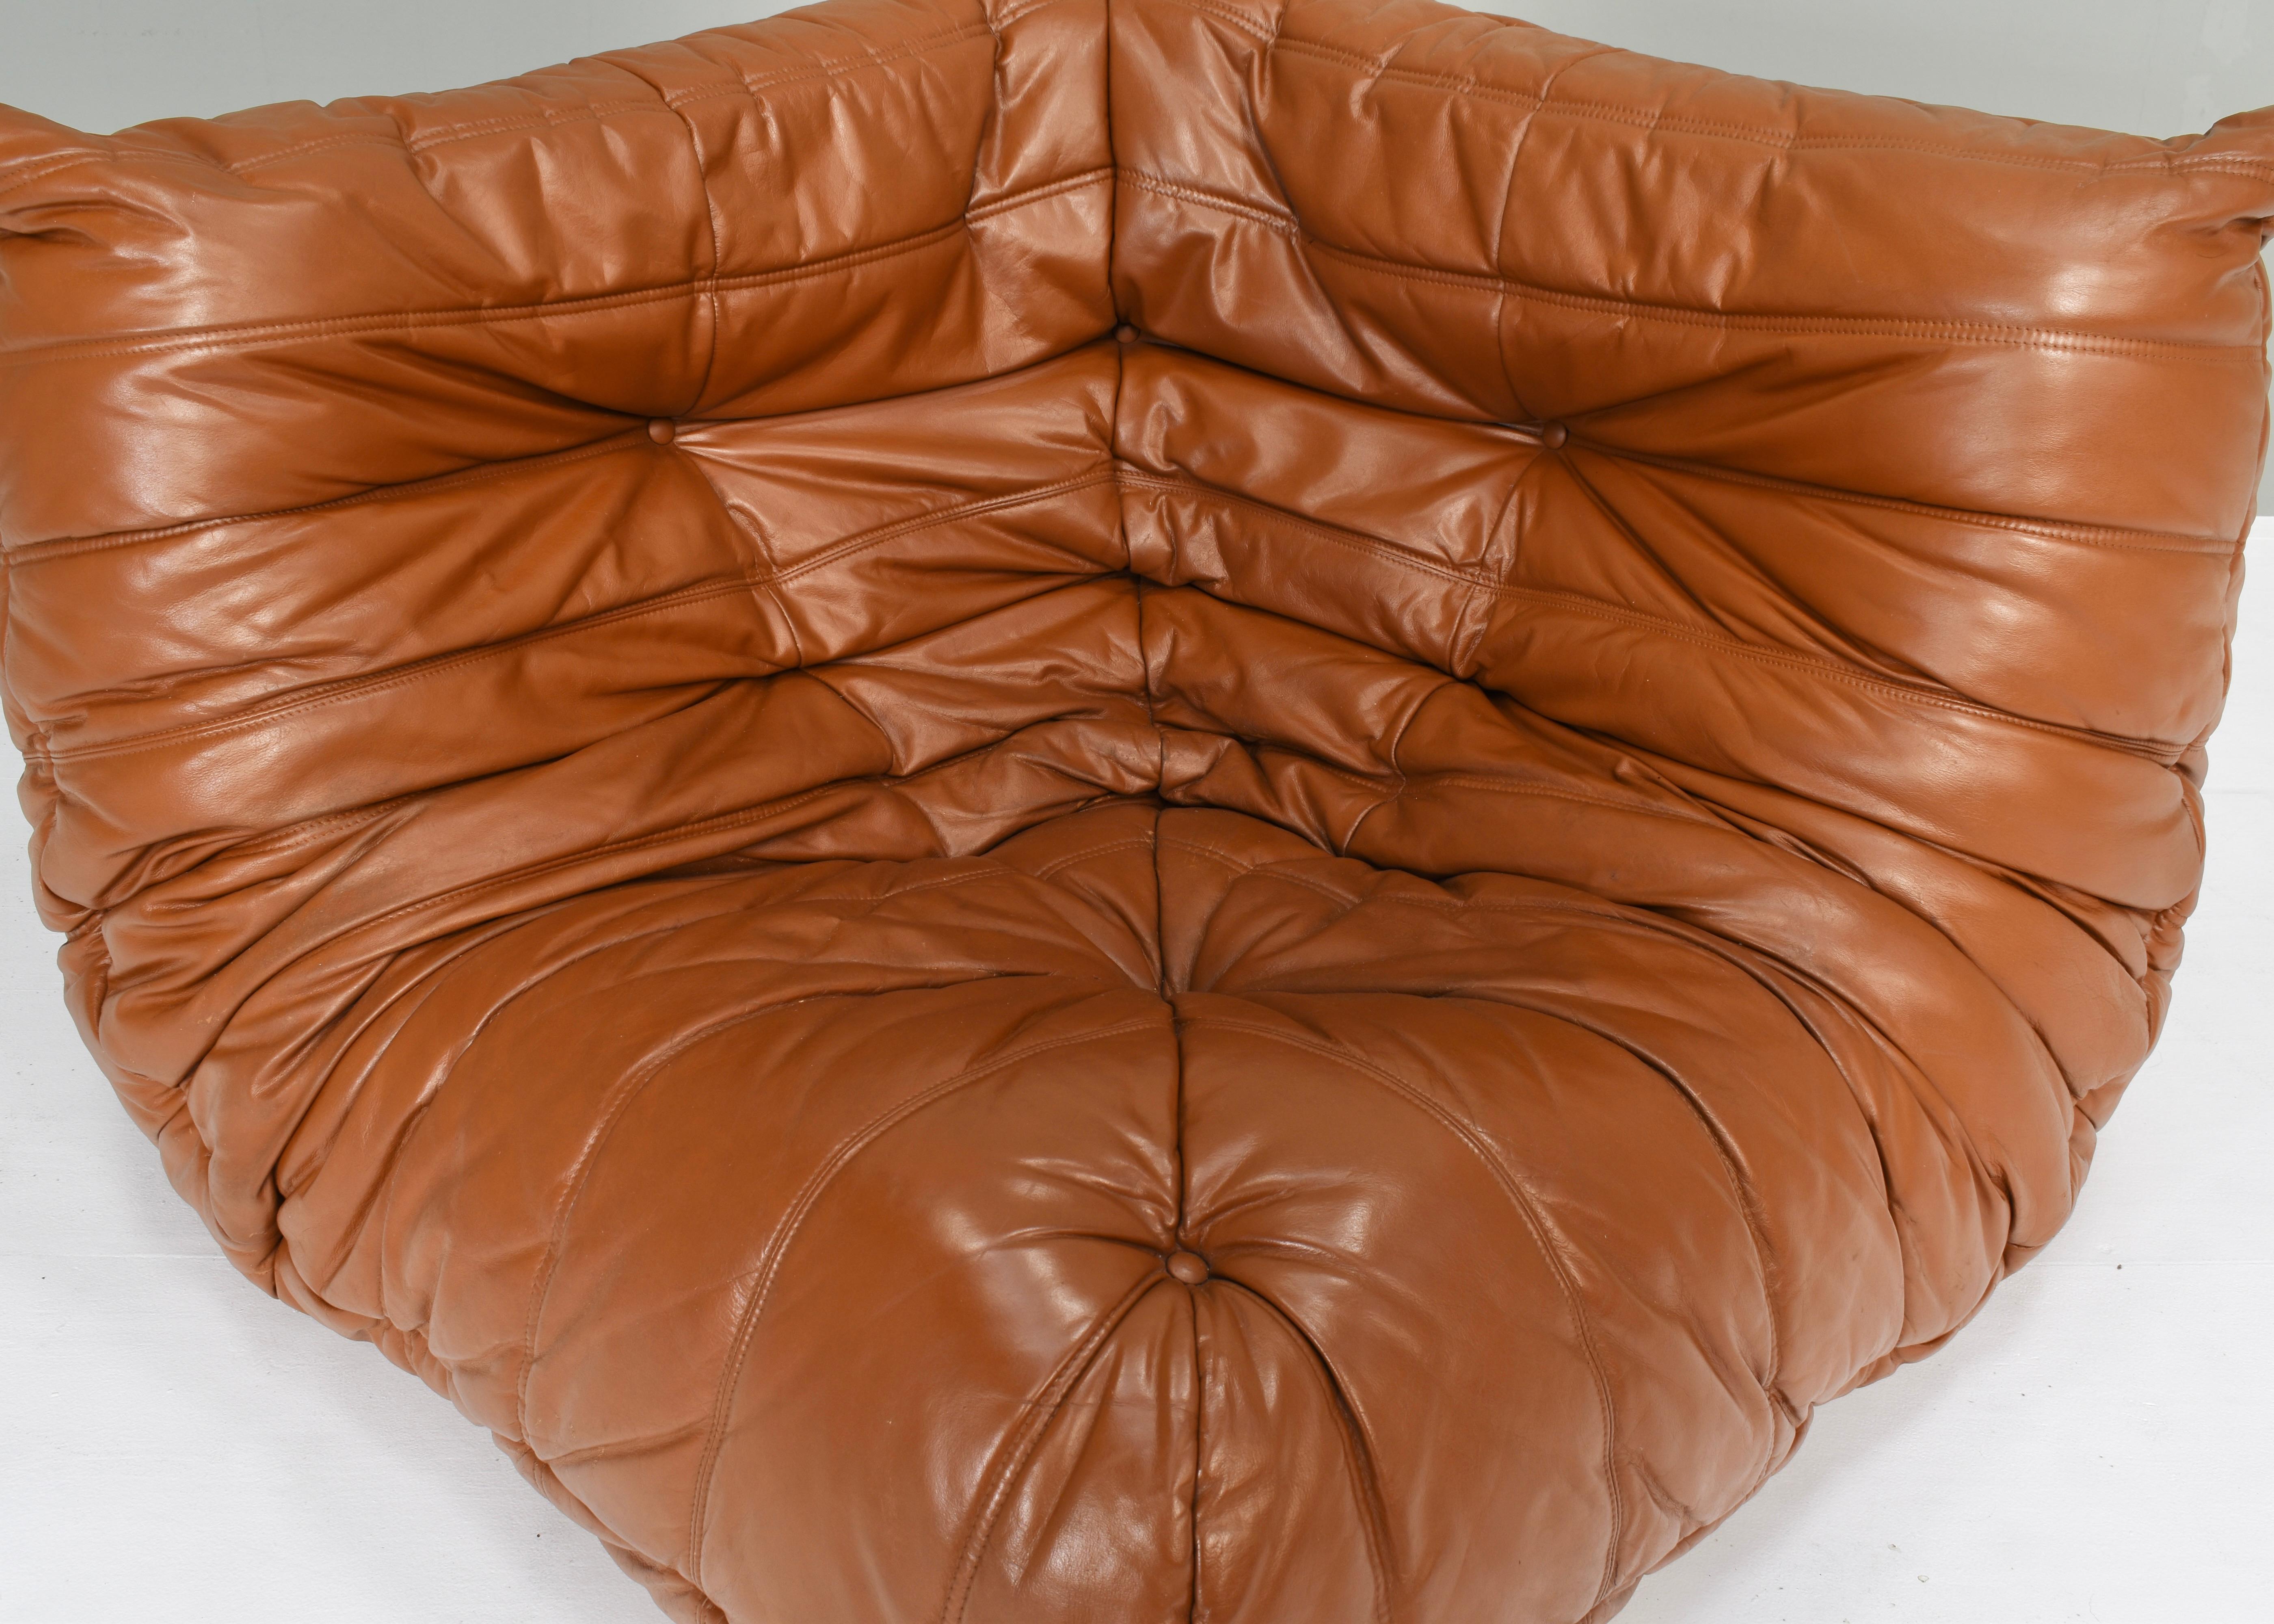 Late 20th Century Togo Corner by Michel Ducaroy for Ligne Roset in Tan Leather France – circa 1970